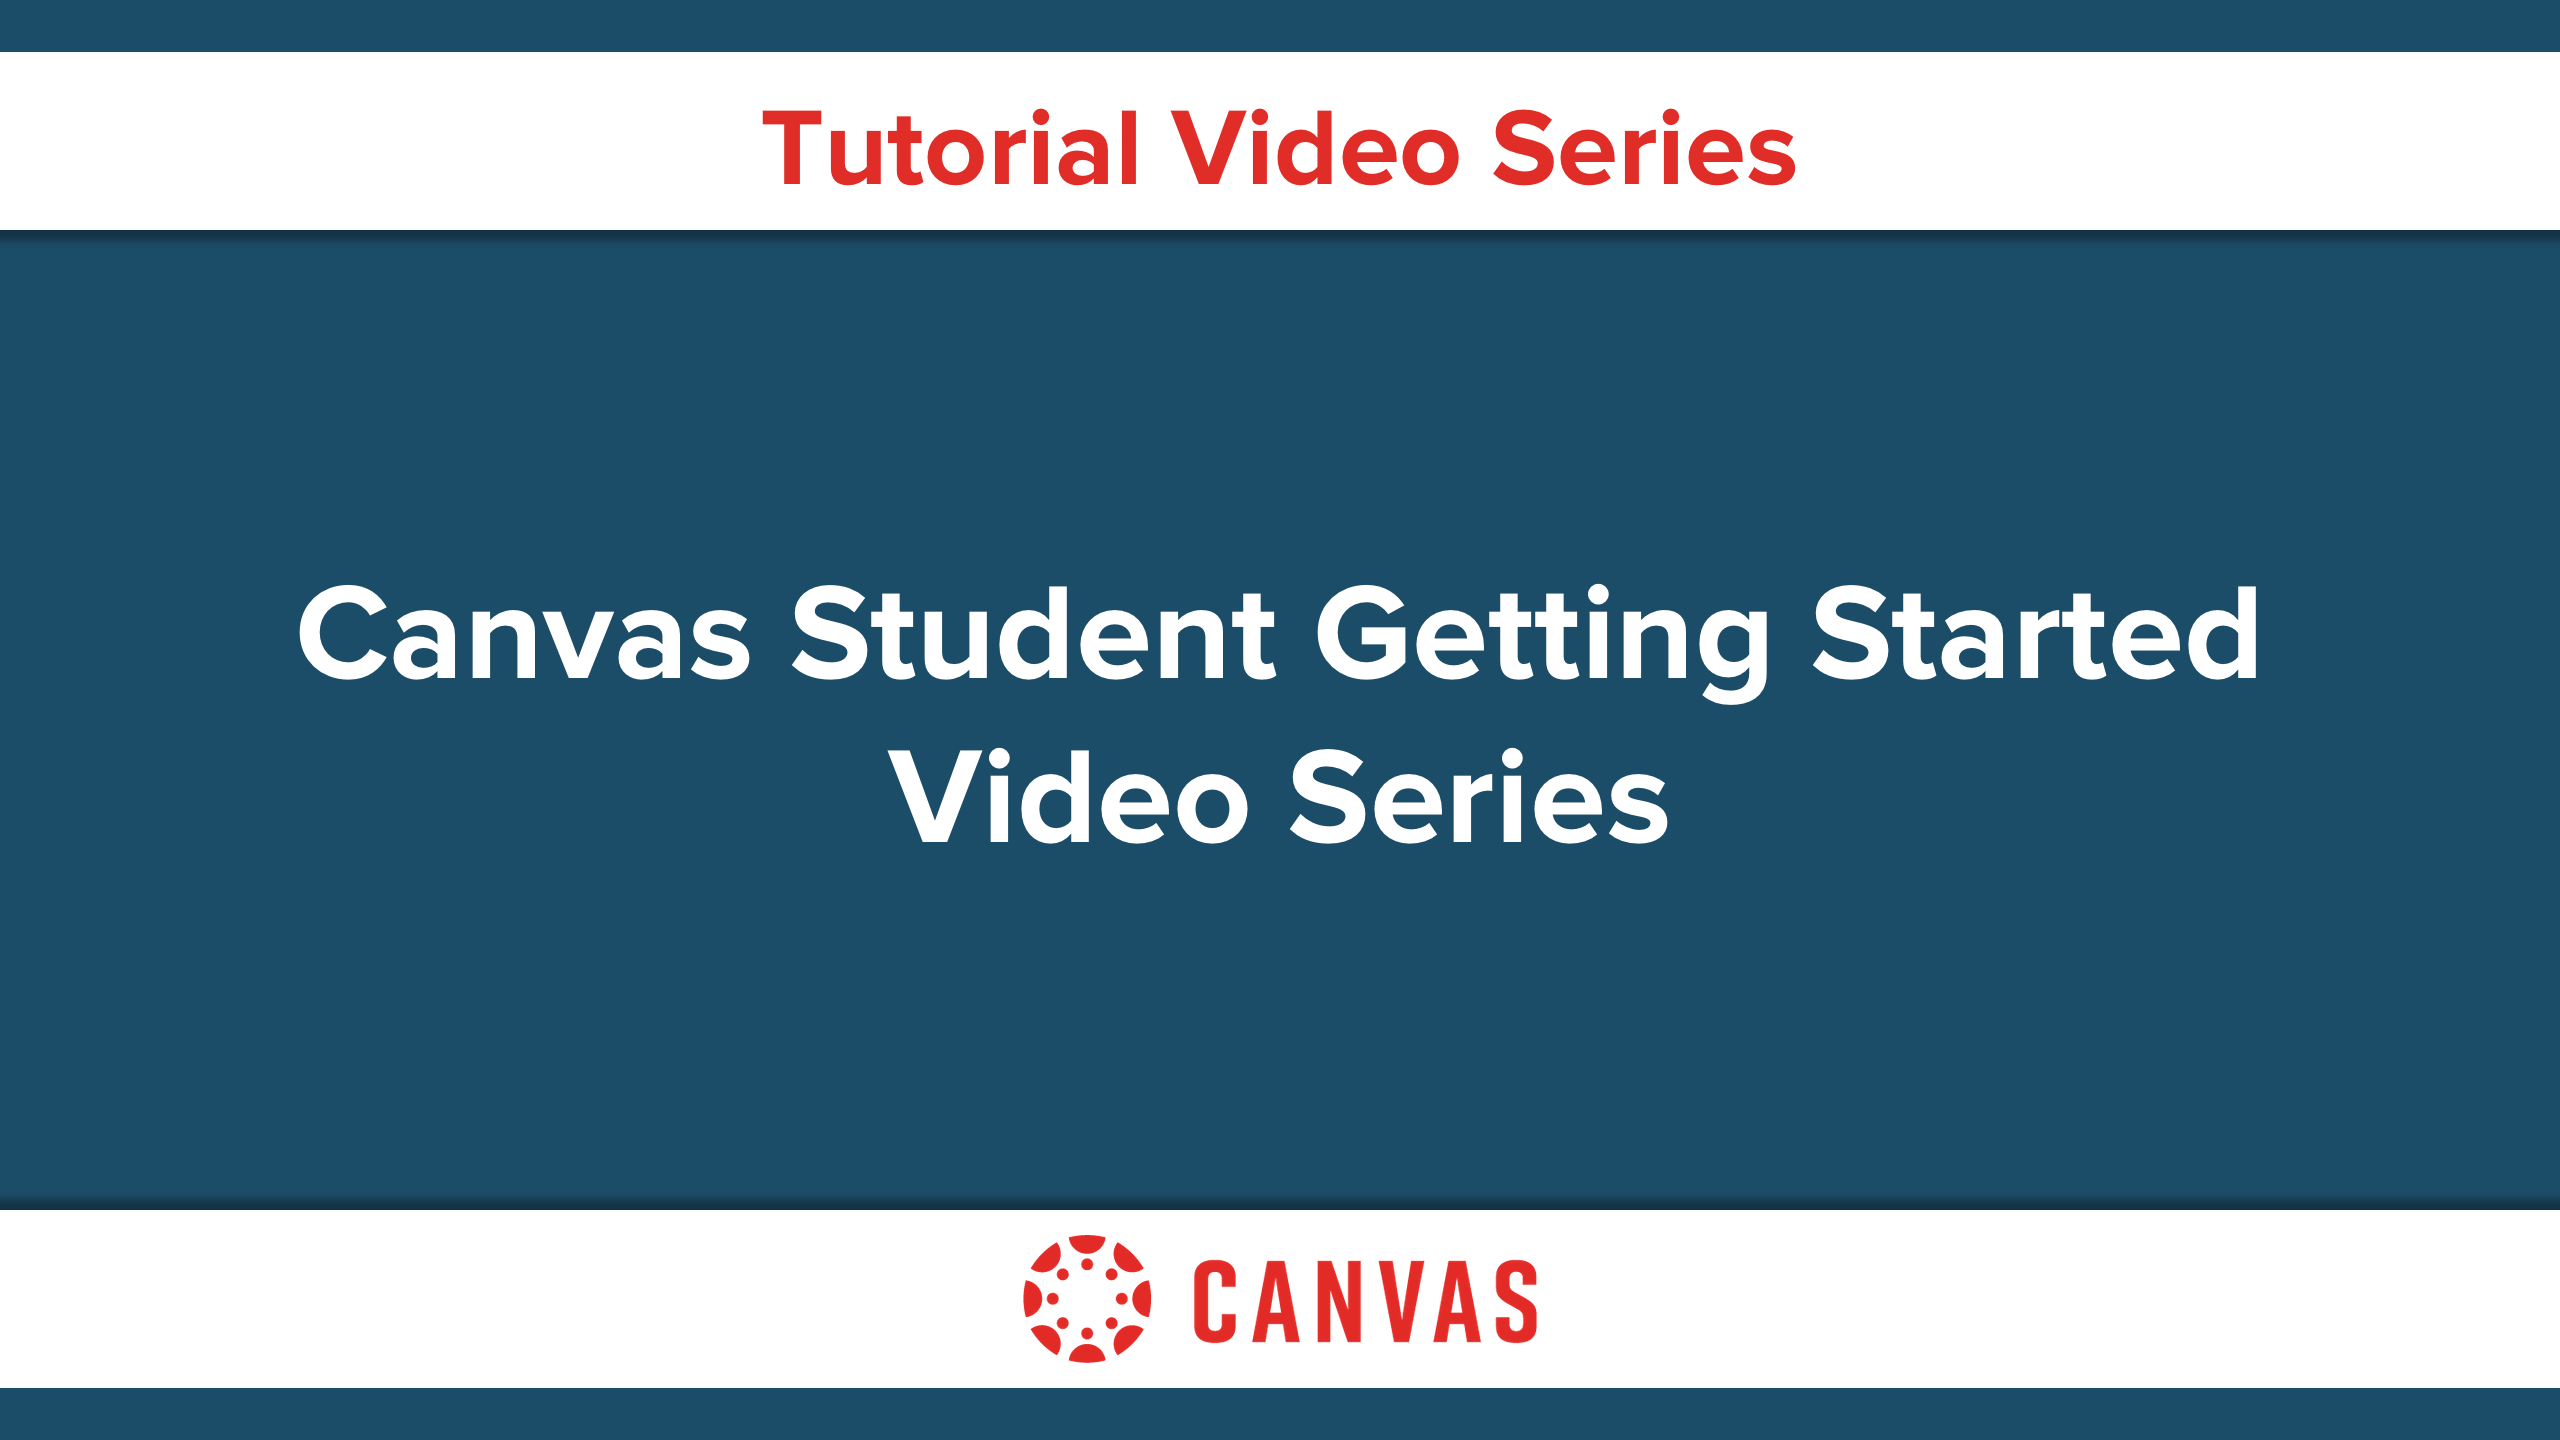 Getting started as a student